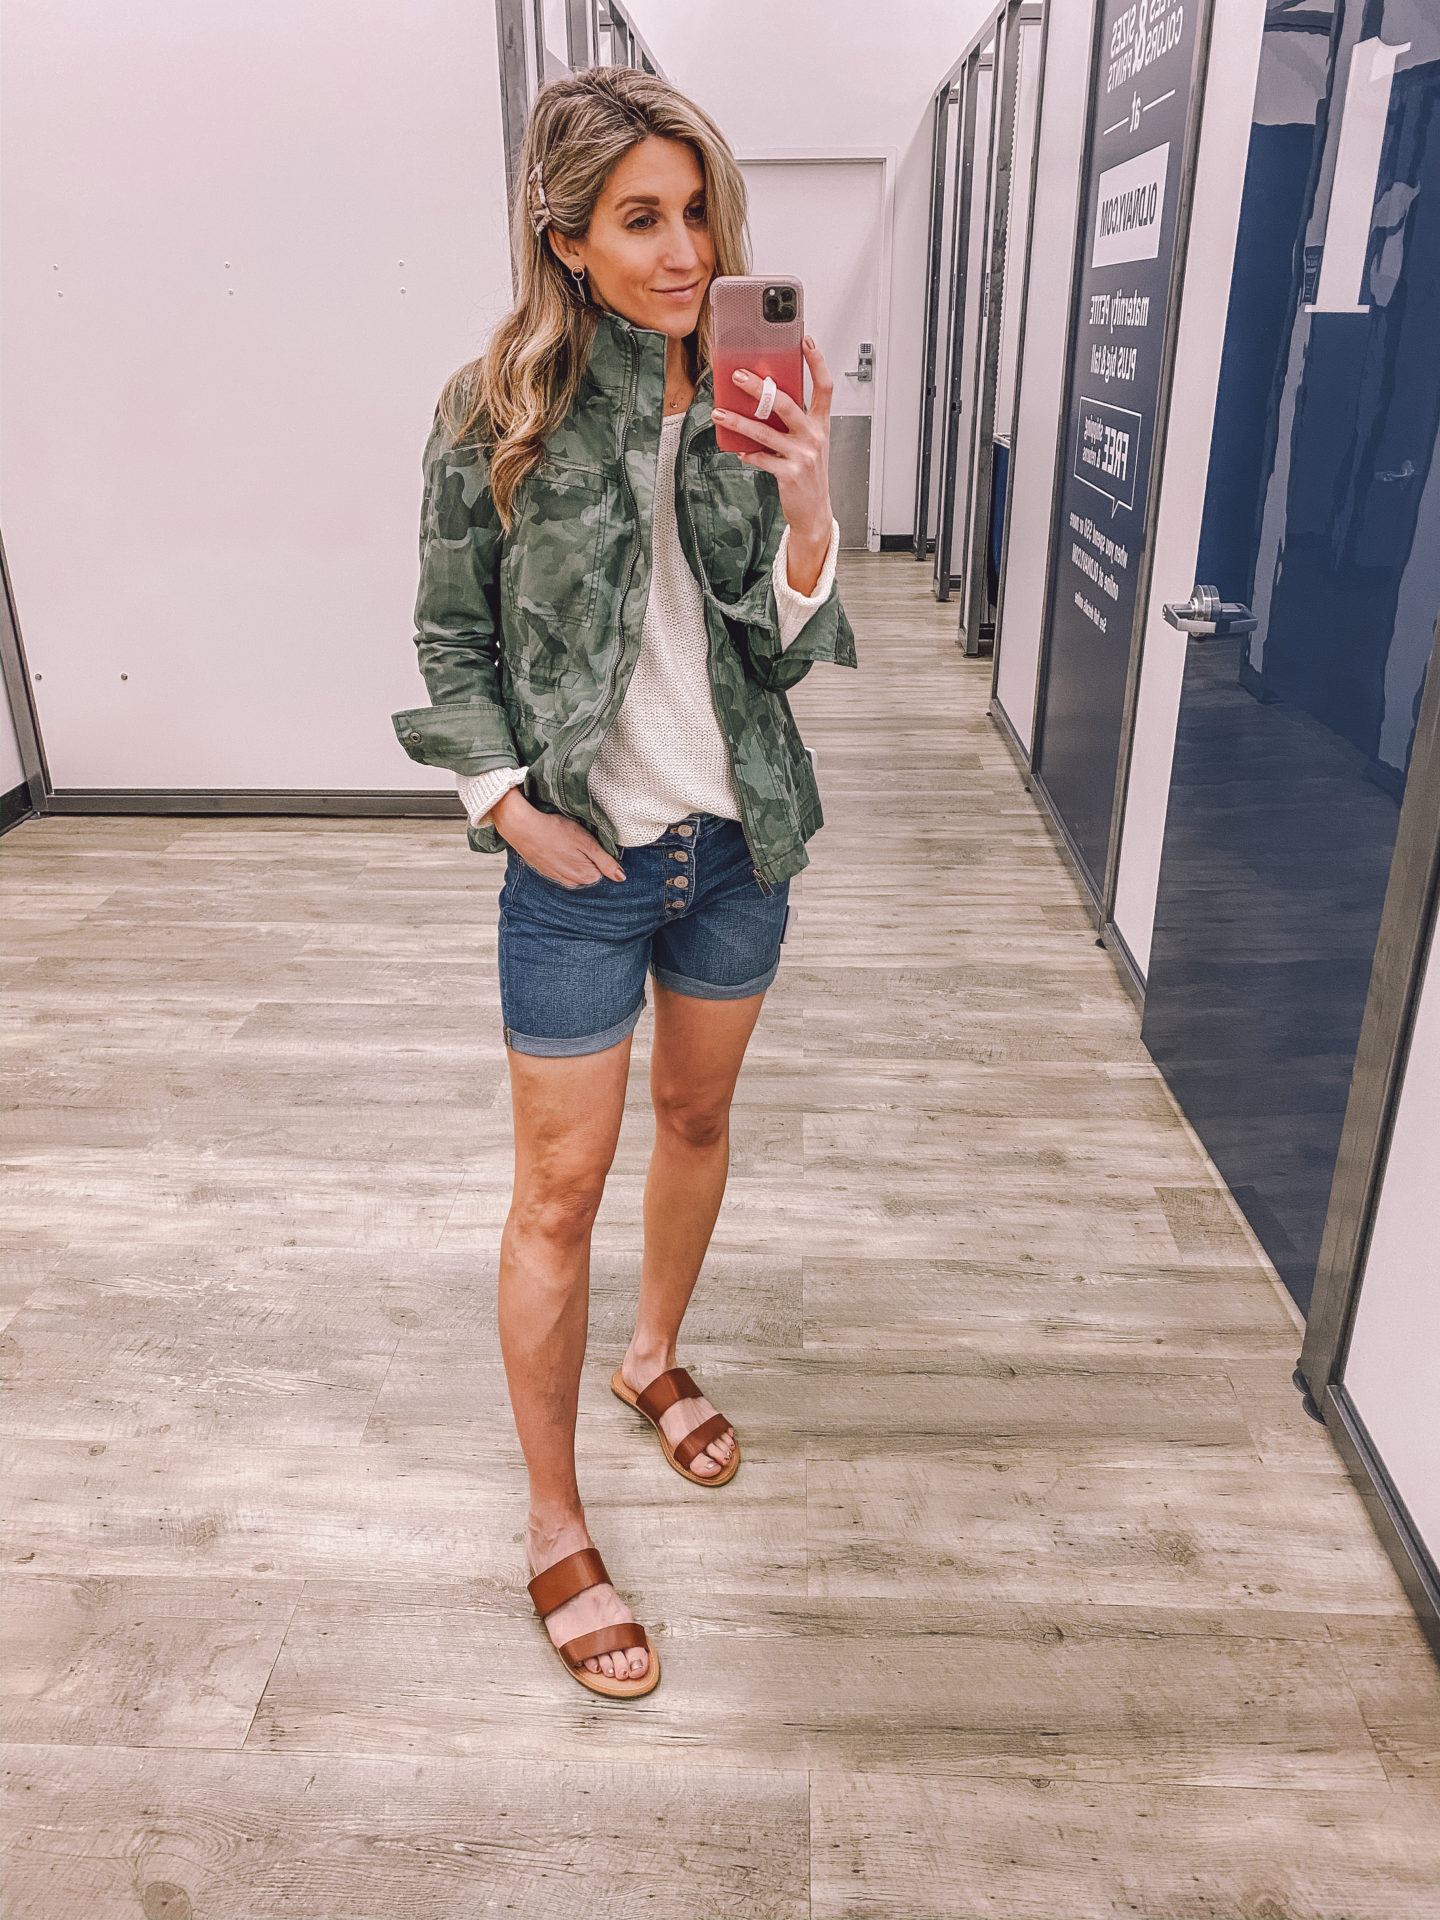 Summer postpartum outfit ideas  Post partum outfits, Mom style